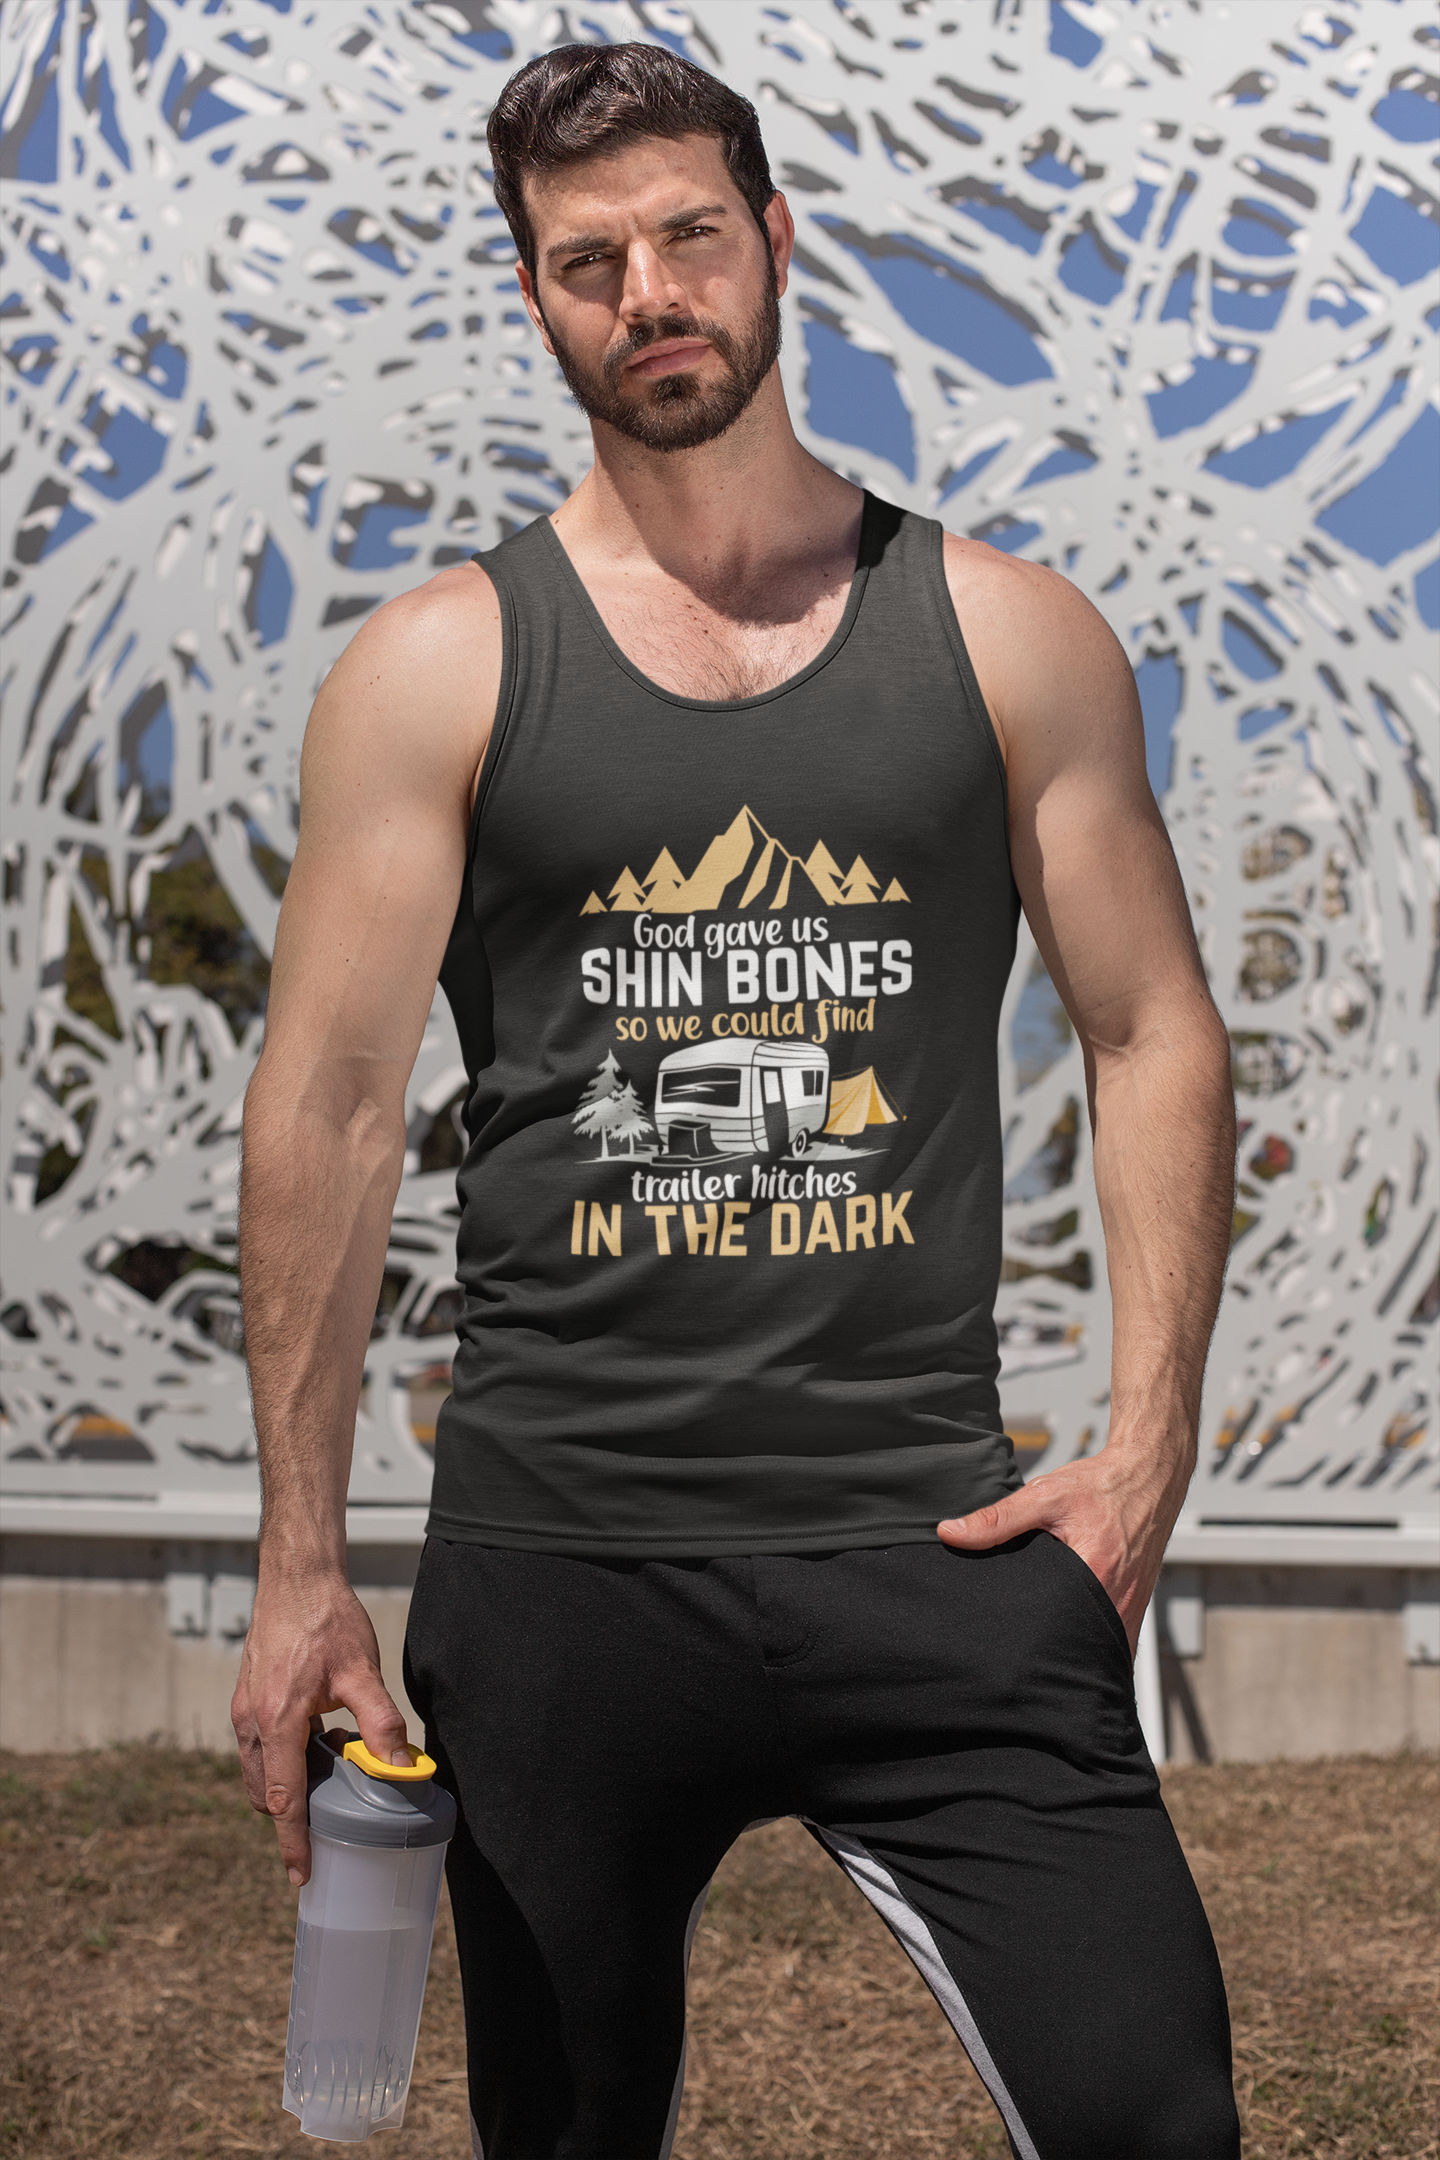 Shin bones find trailer hitches; Soft 100% cotton tank top. Removable tag for comfort